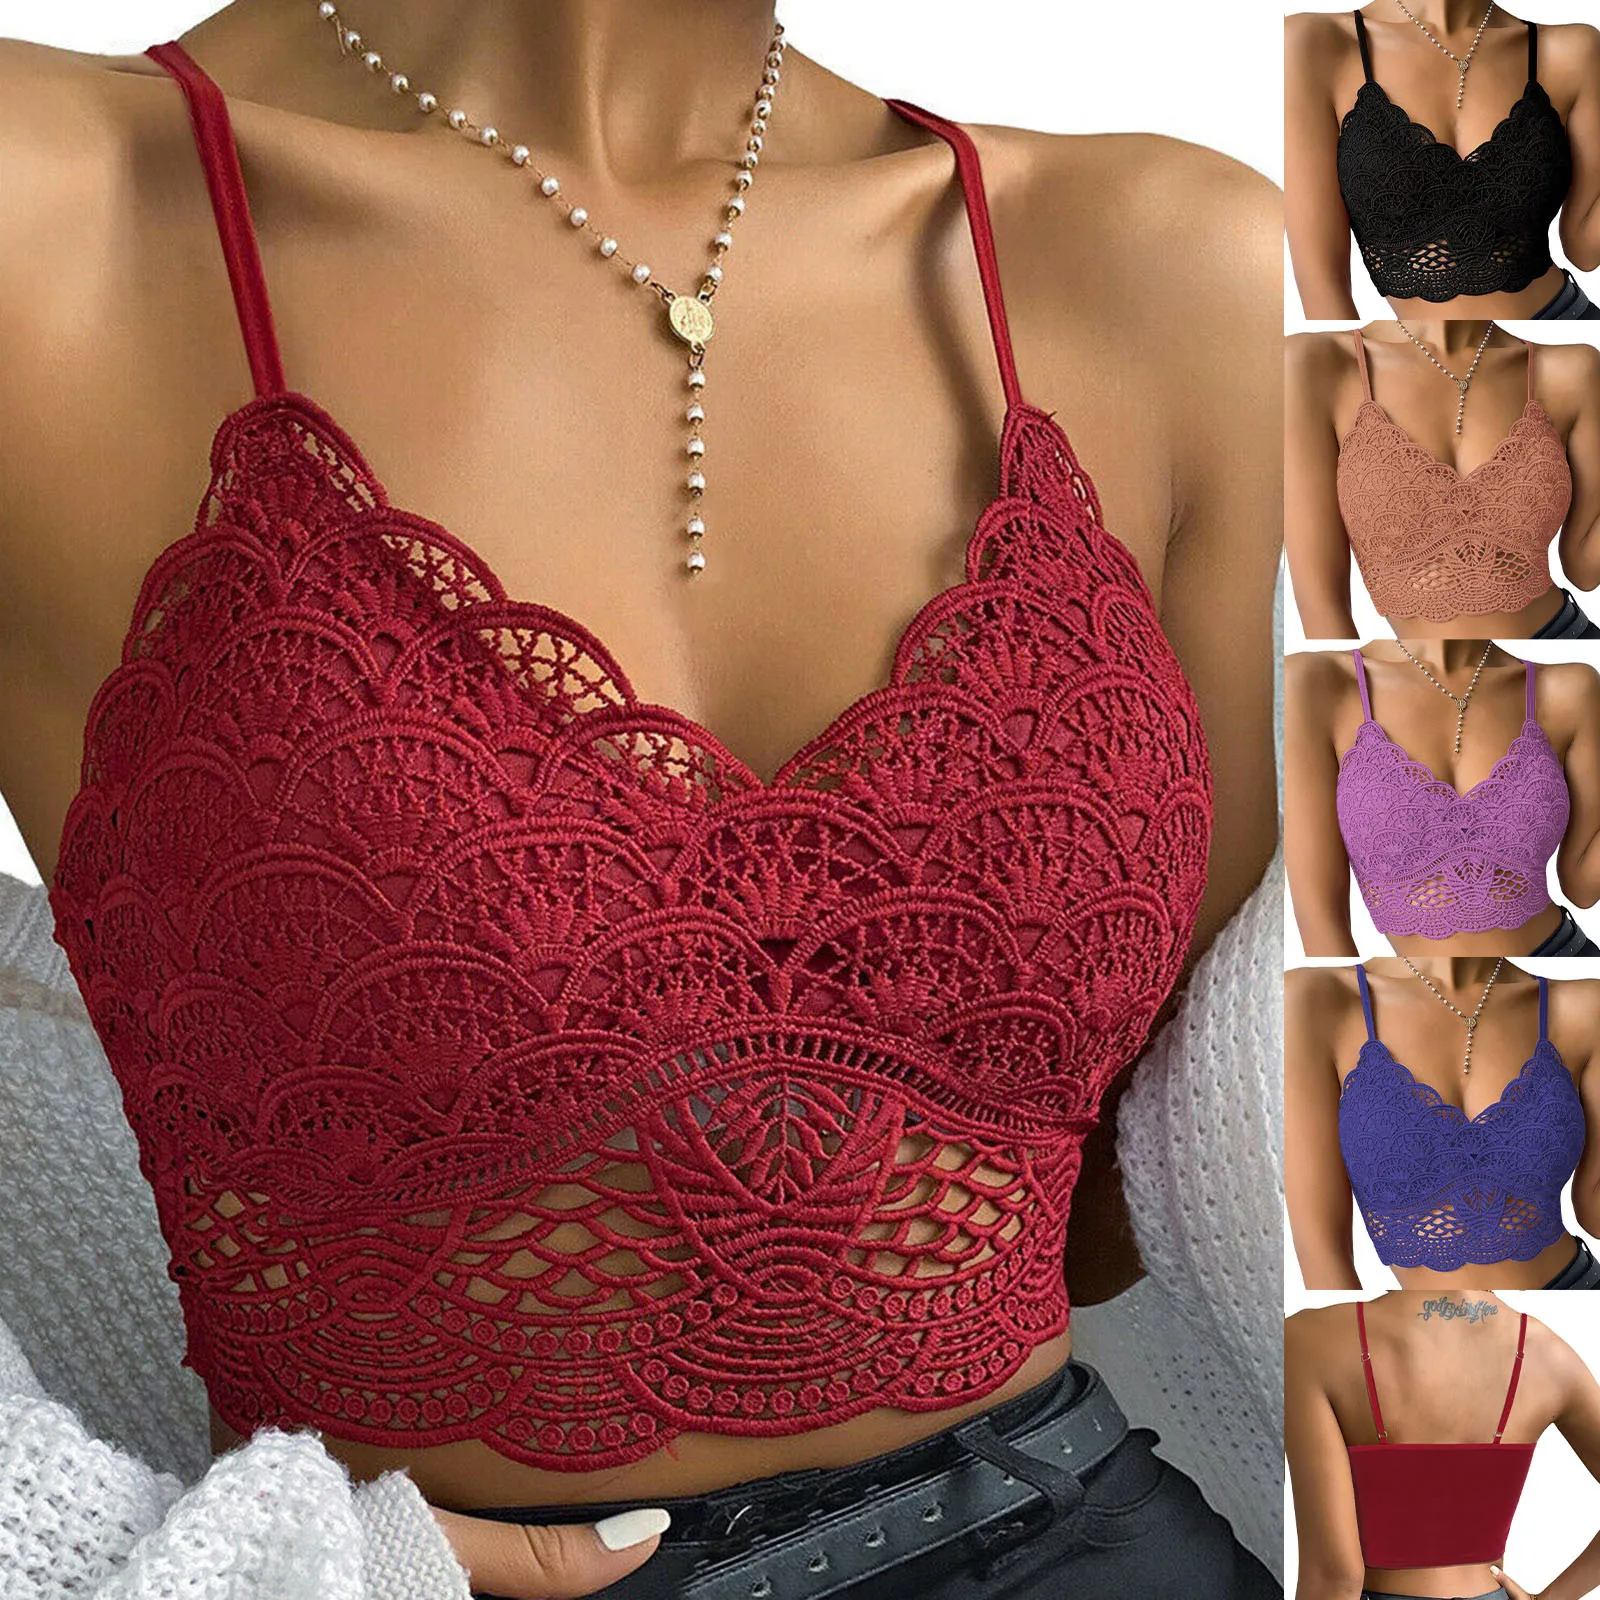 

Women Lace Bra Push Up Crop Tops Solid Wireless Lingerie Sexy V-Neck Hollow Out Camis Bralette Underwear Camisole Haut Femme